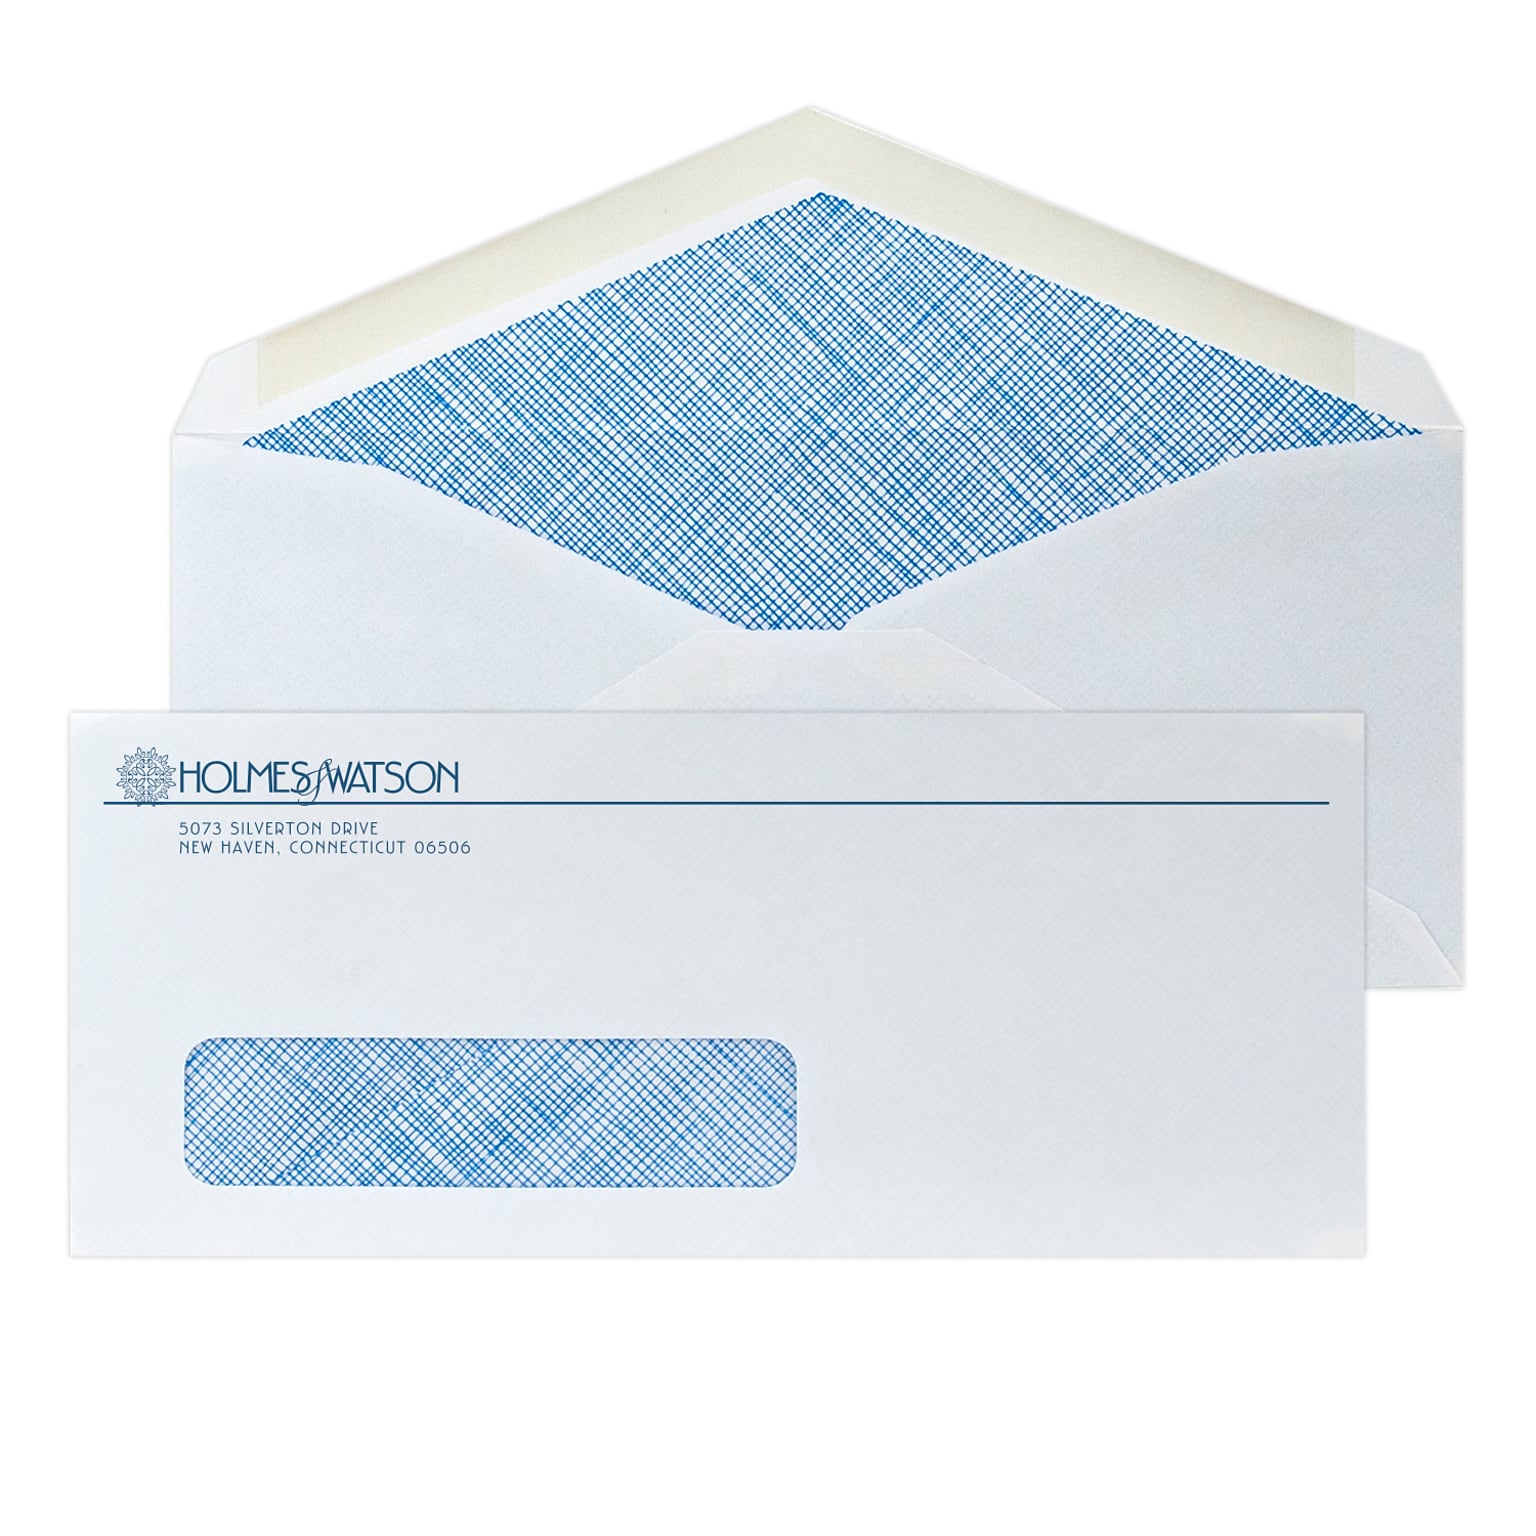 Custom #10 Window Envelopes with Security Tint and V-Flap, 4 1/4 x 9 1/2, 24# White Wove, 1 Custom Ink, 250 / Pack